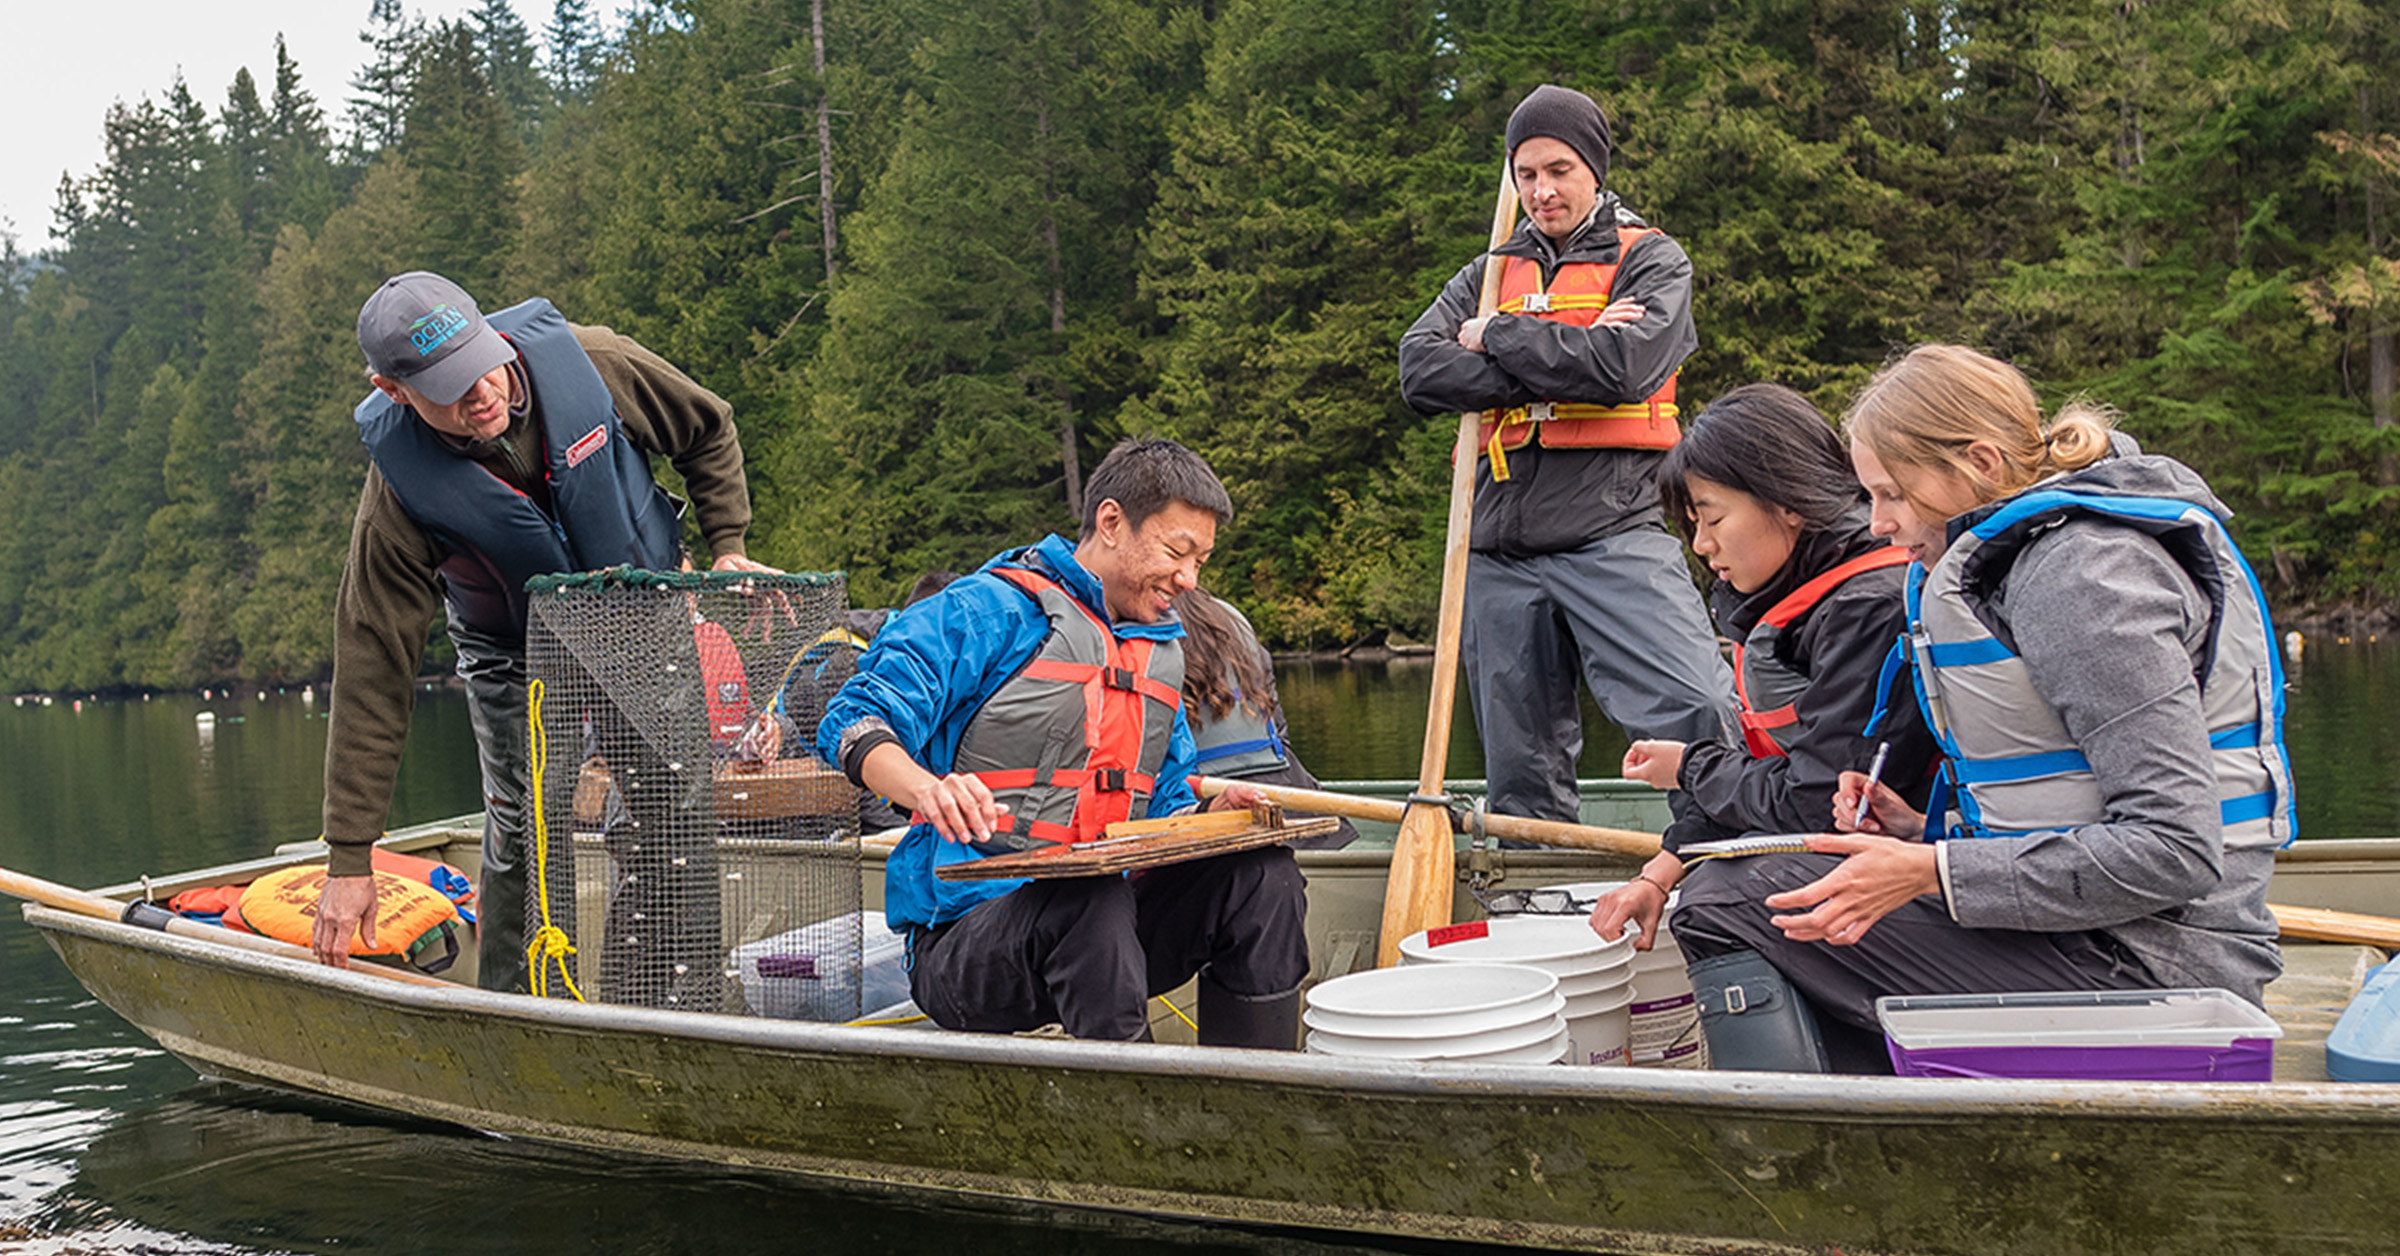 5 UBC researchers are on a boat. They are looking at fish they just caught for their research.